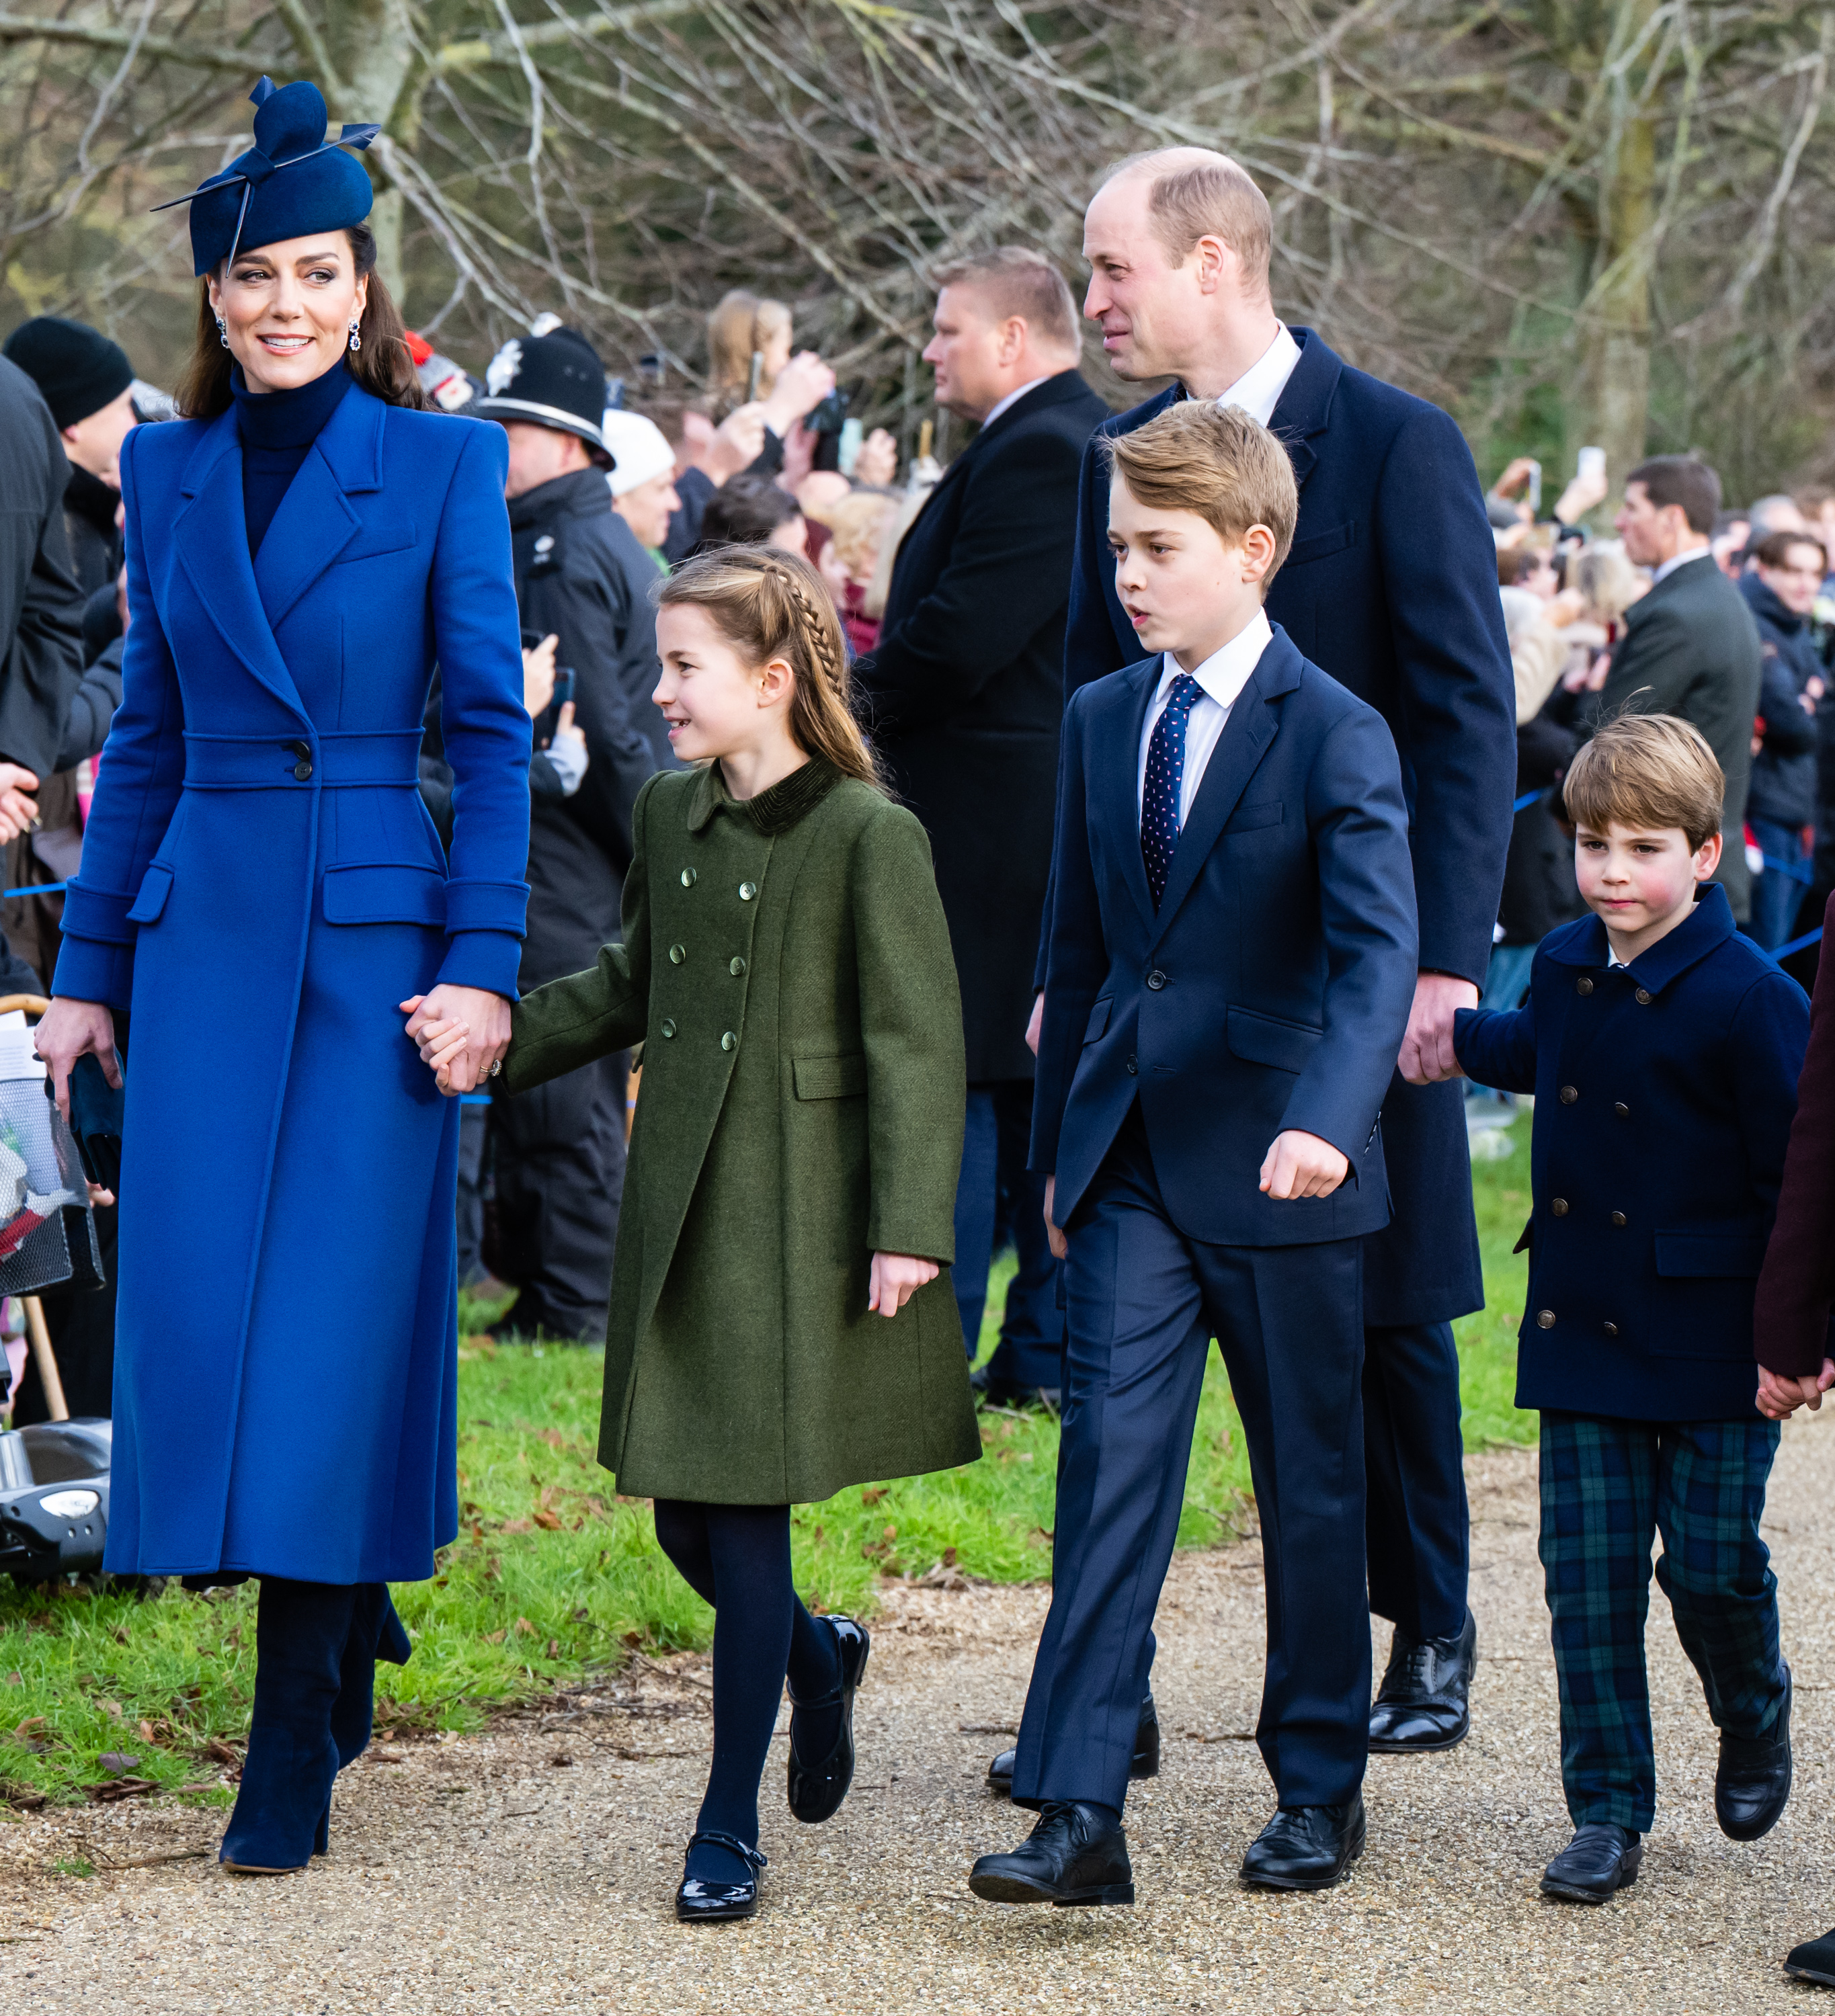 Kate Middleton in a blue coat and hat, walking with Prince William and their three children, all dressed in formal attire